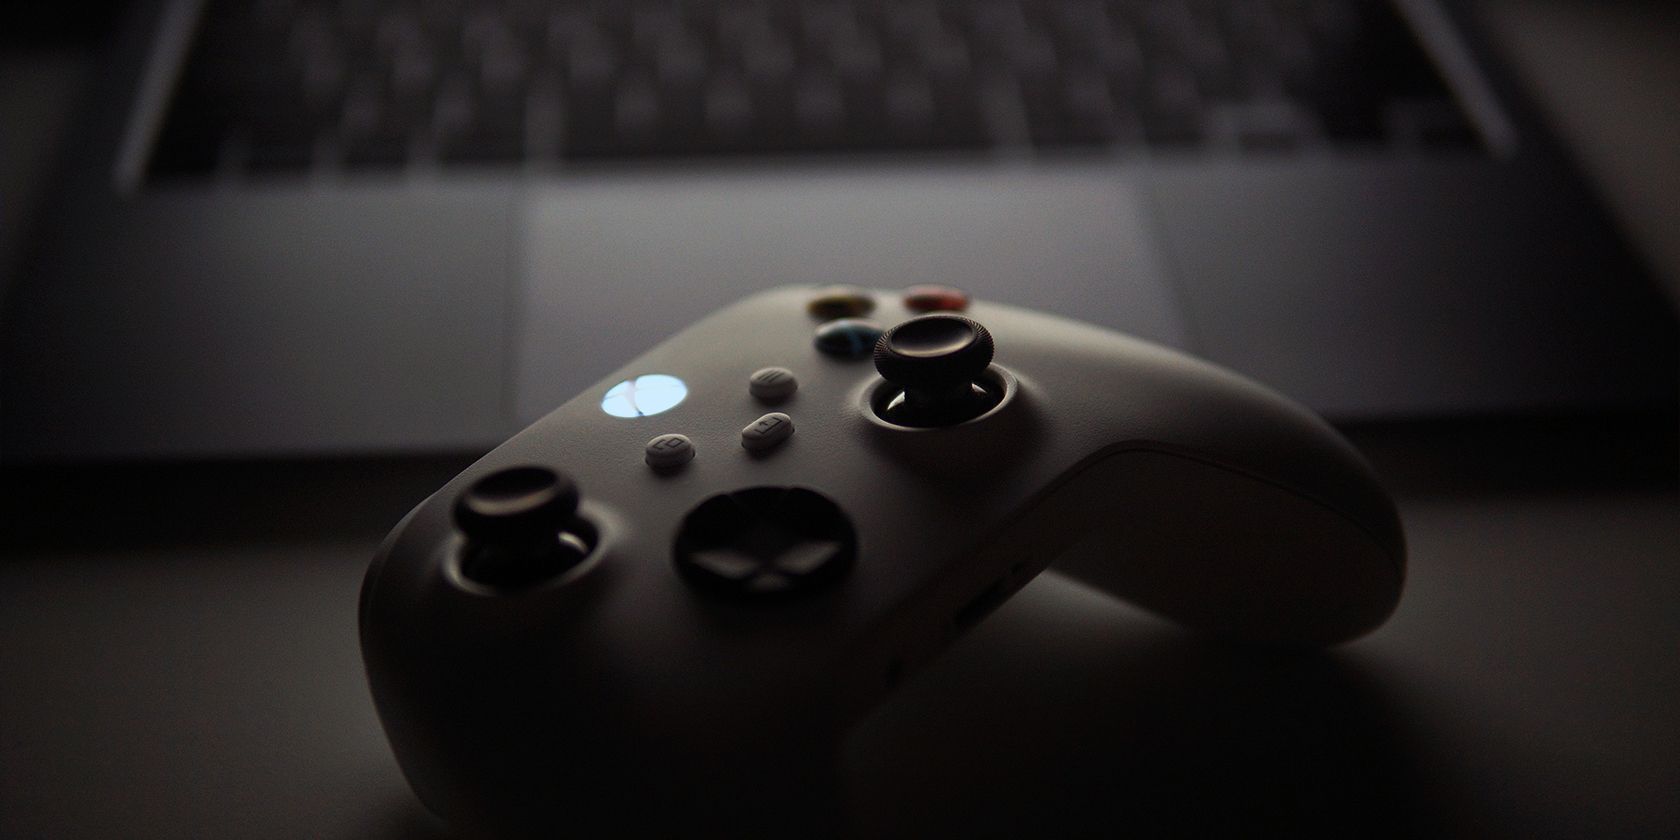 A Gaming Controller in front of an Apple MacBook